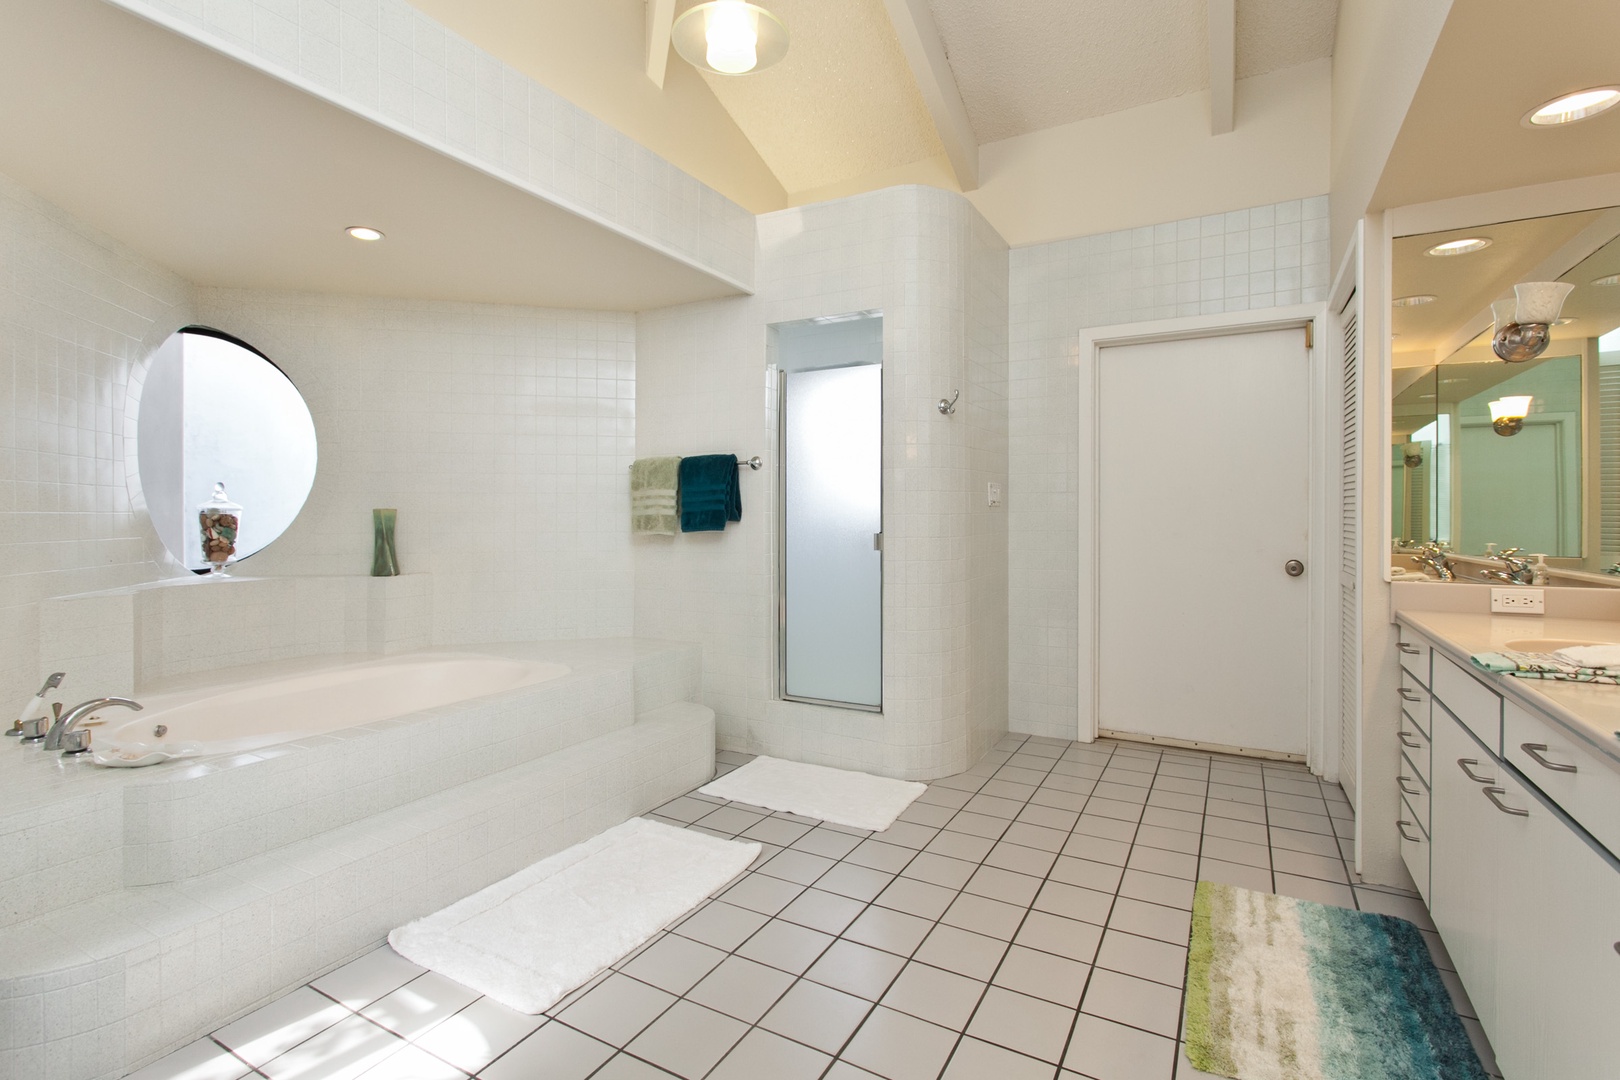 Kailua Vacation Rentals, Hale Kolea* - Ensuite bathroom with a walk in shower and tub.